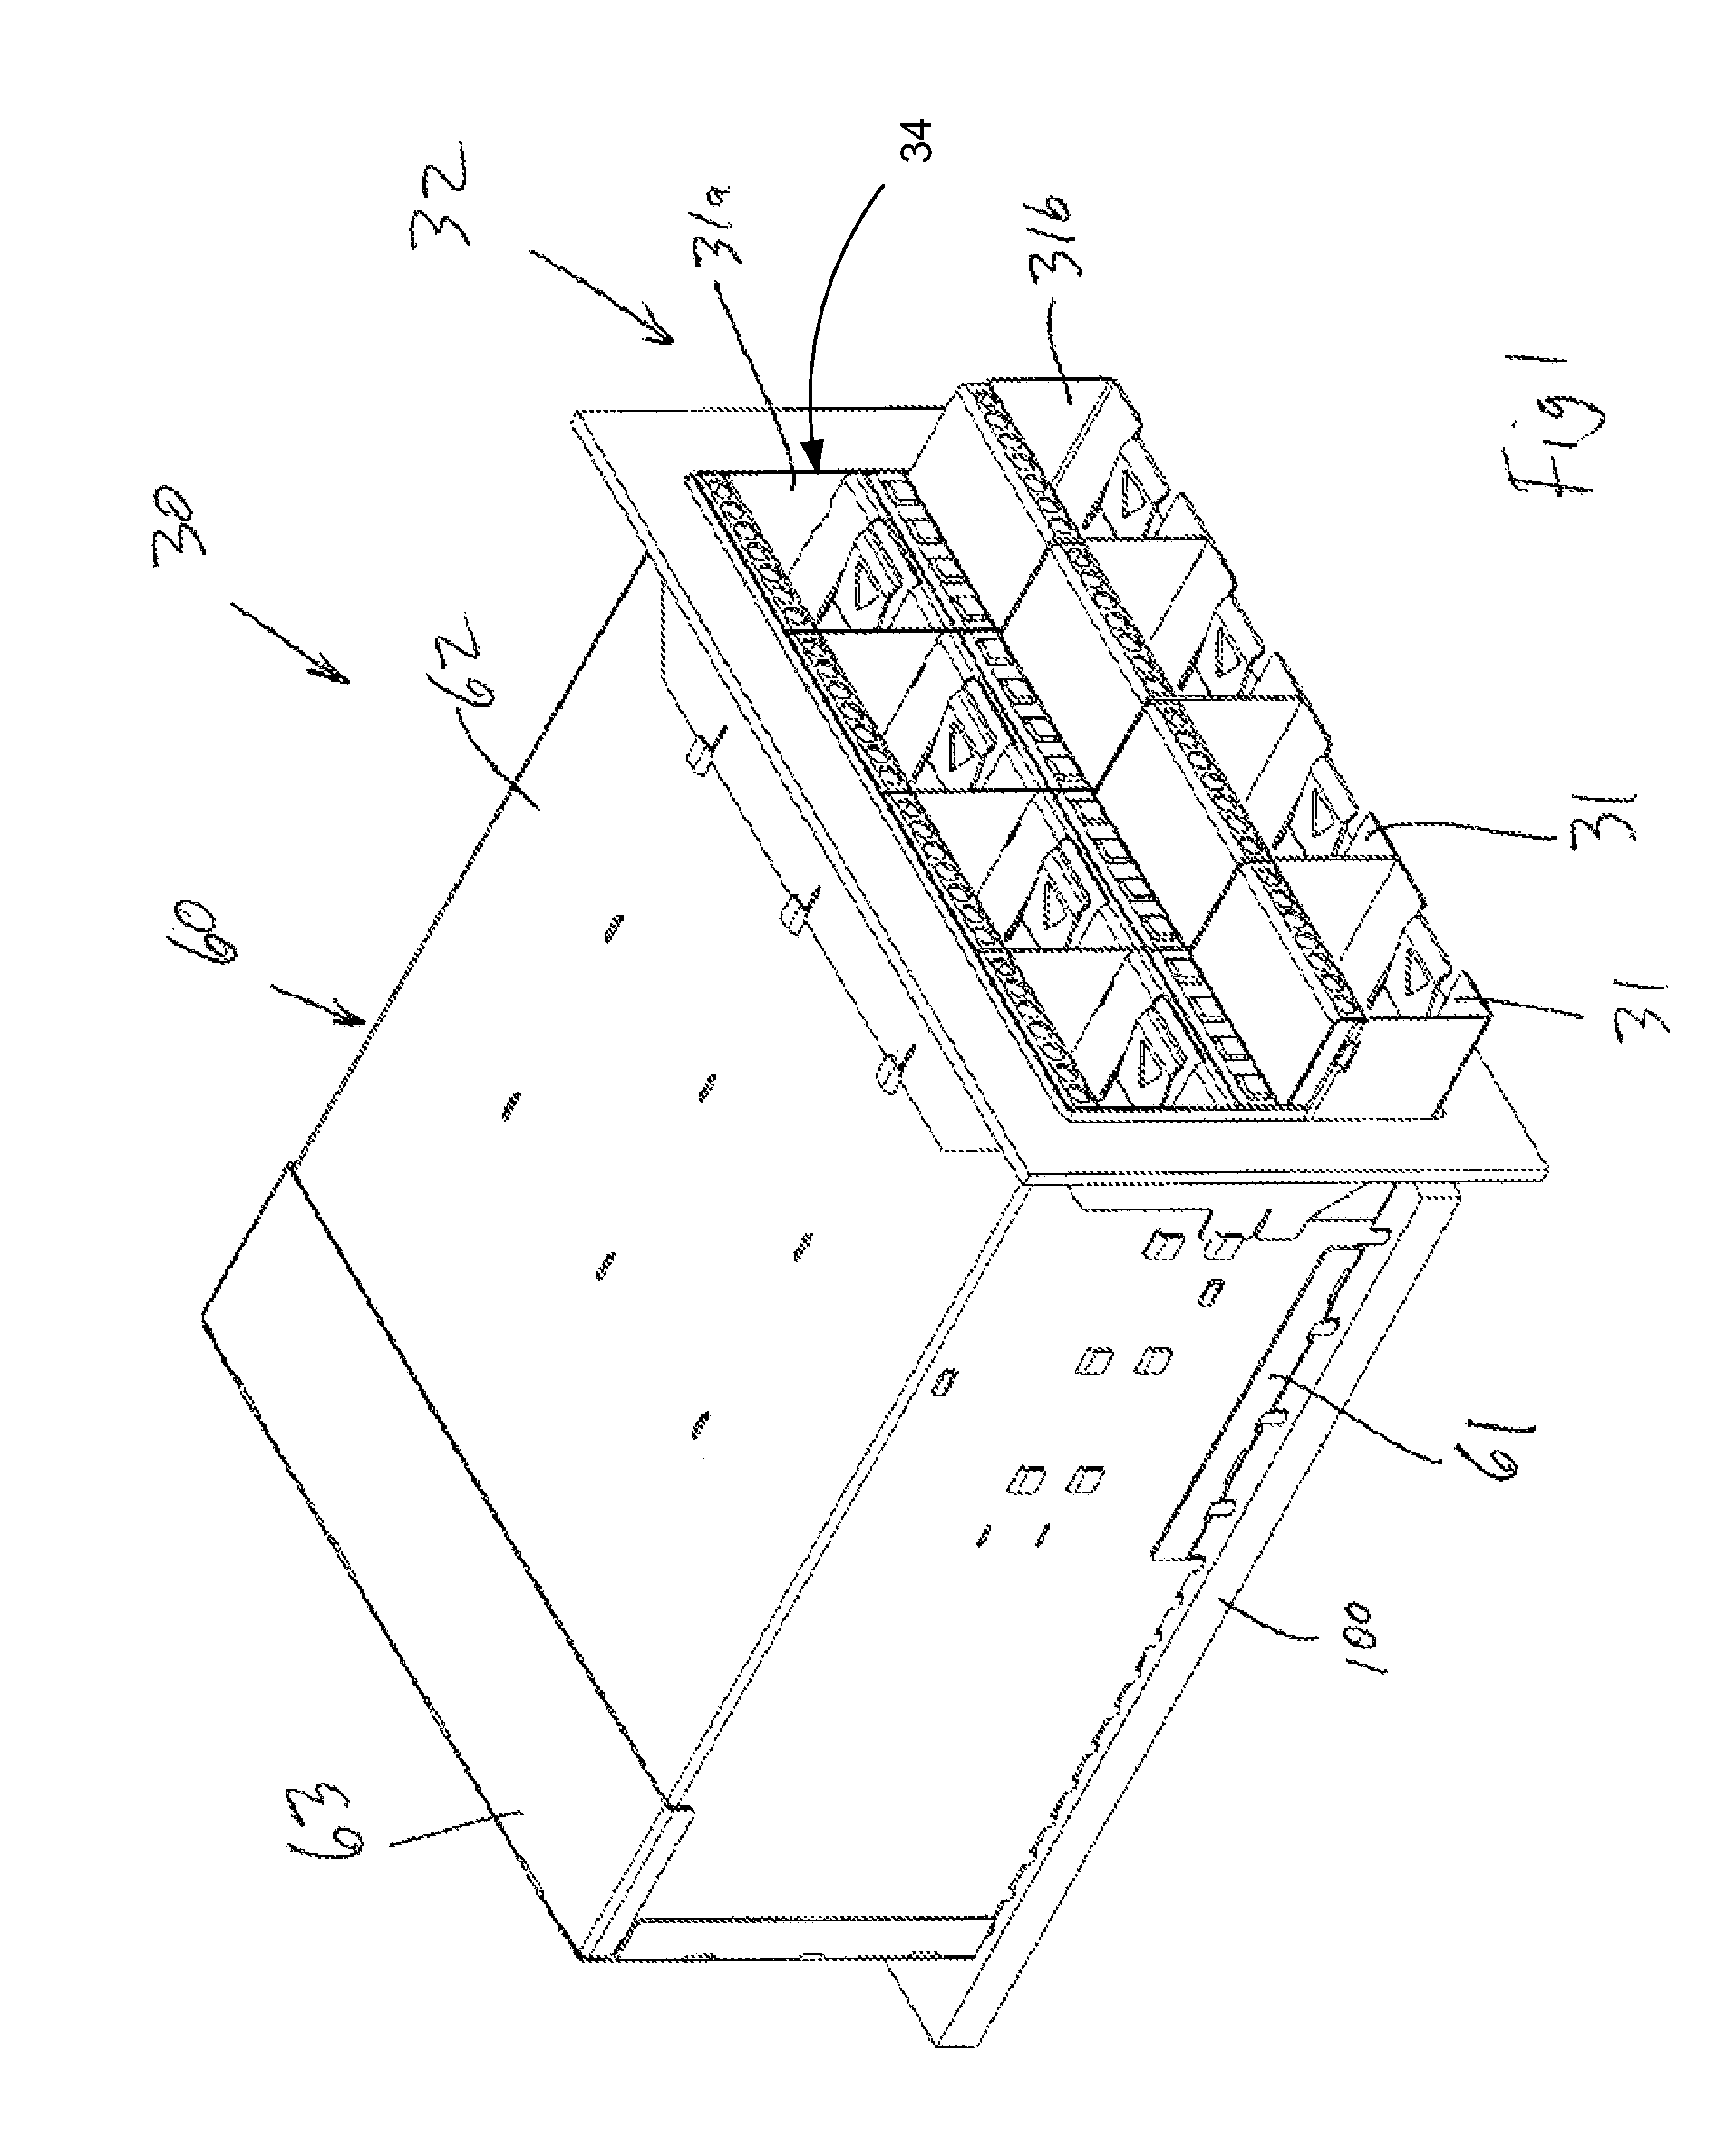 Connector system with airflow control